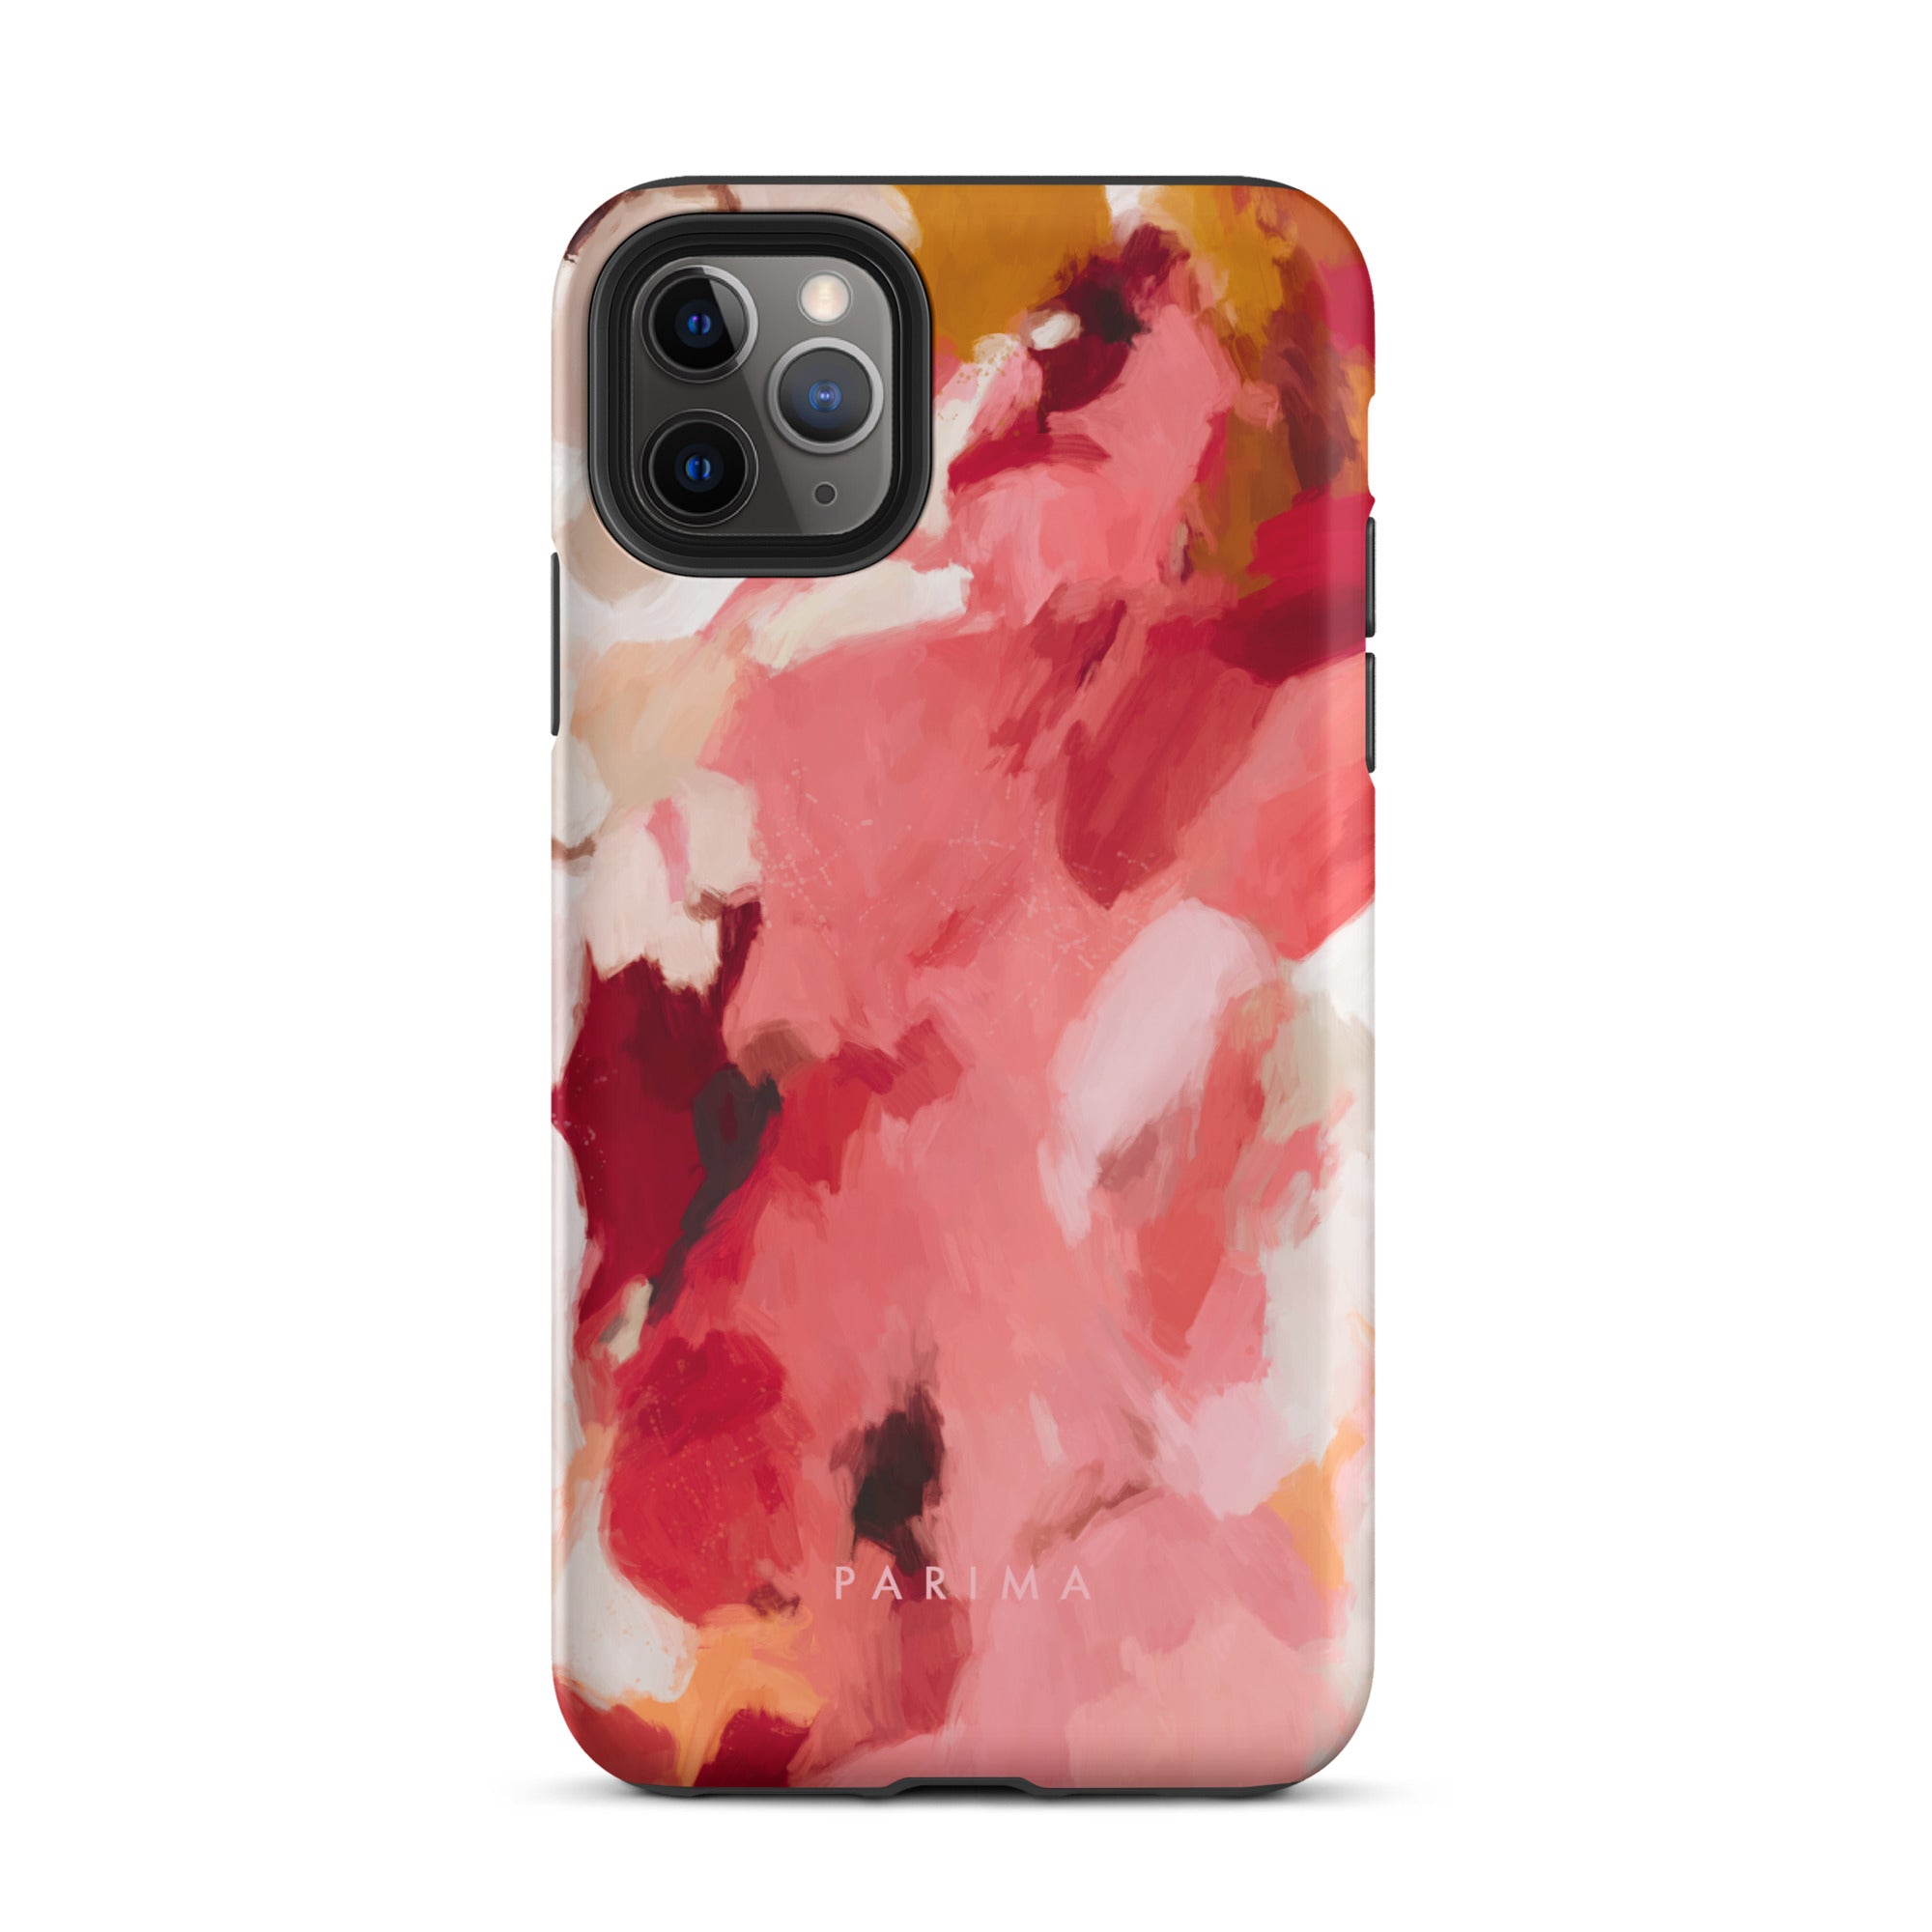 Apple, red and pink abstract art - iPhone 11 Pro Max tough case by Parima Studio